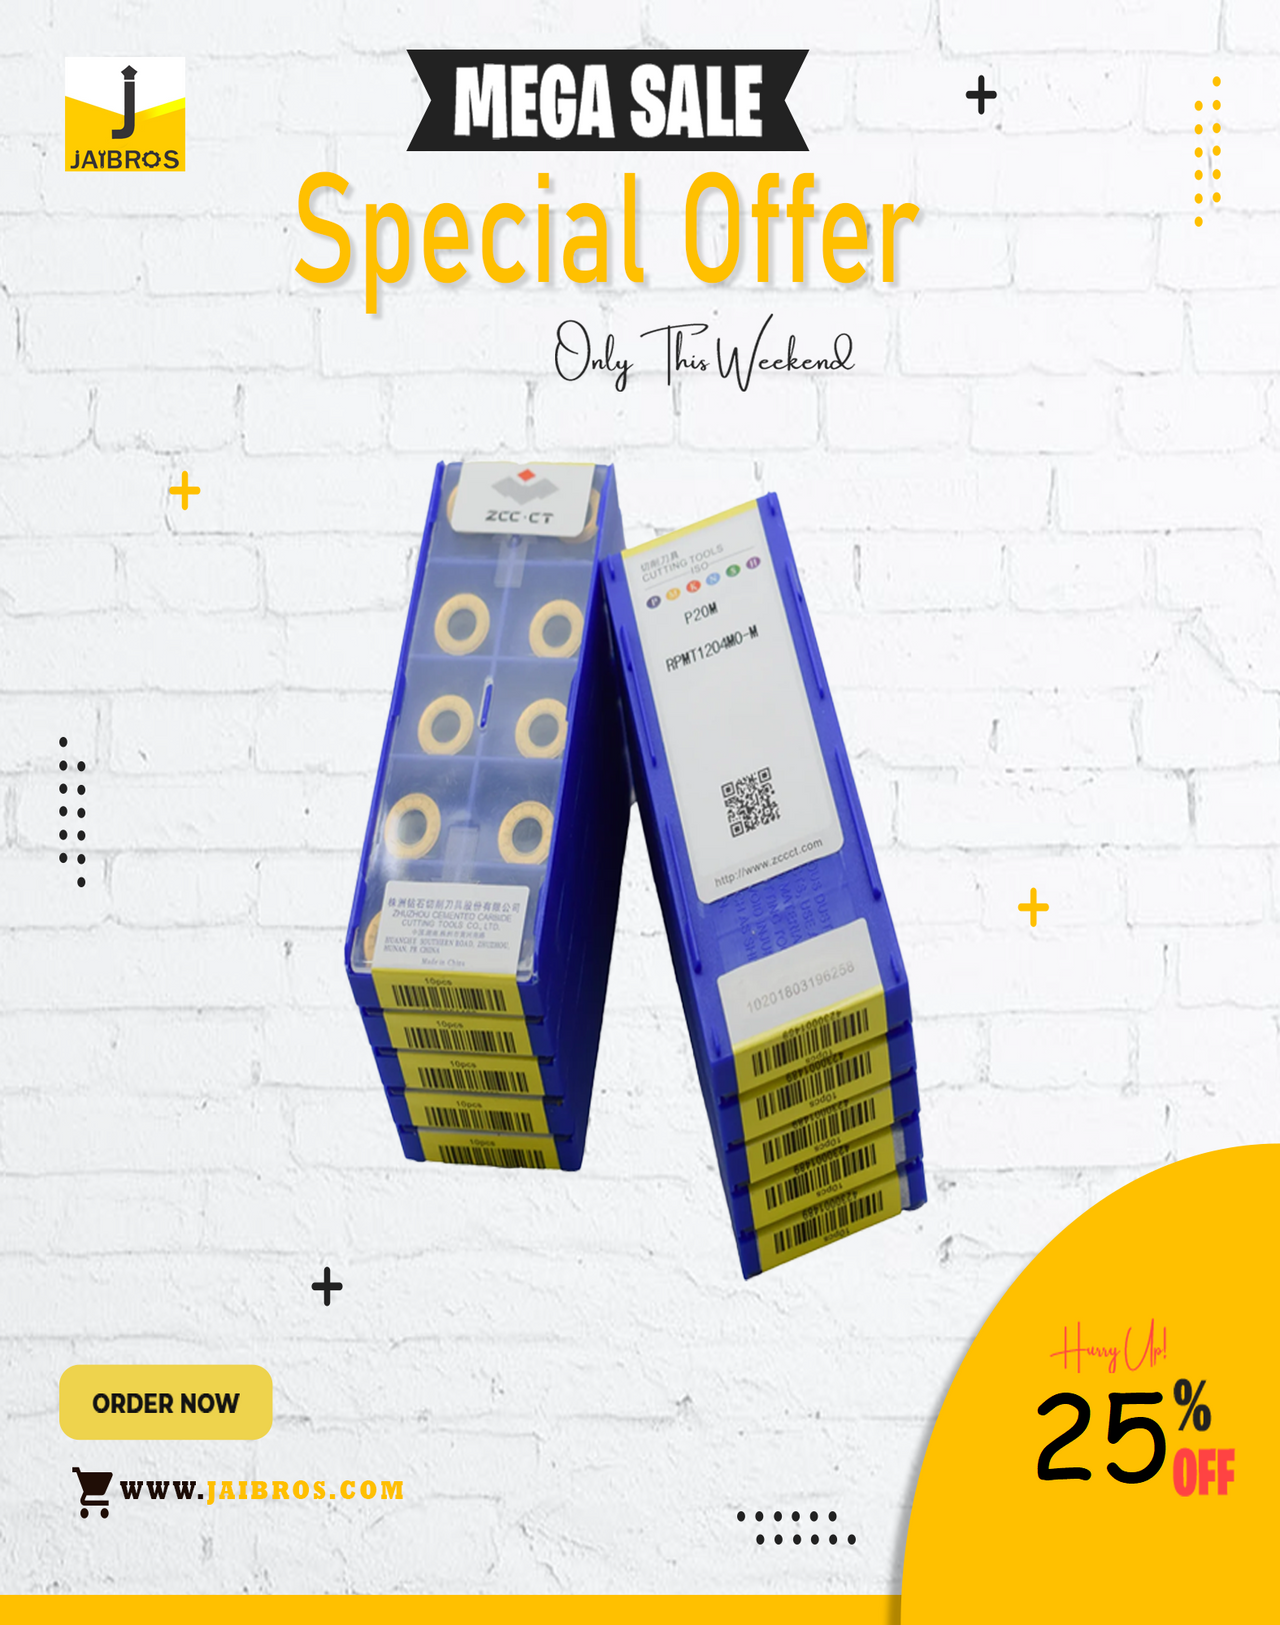 ZCCCT R6 New grade deal amazing price pack of 100 pcs